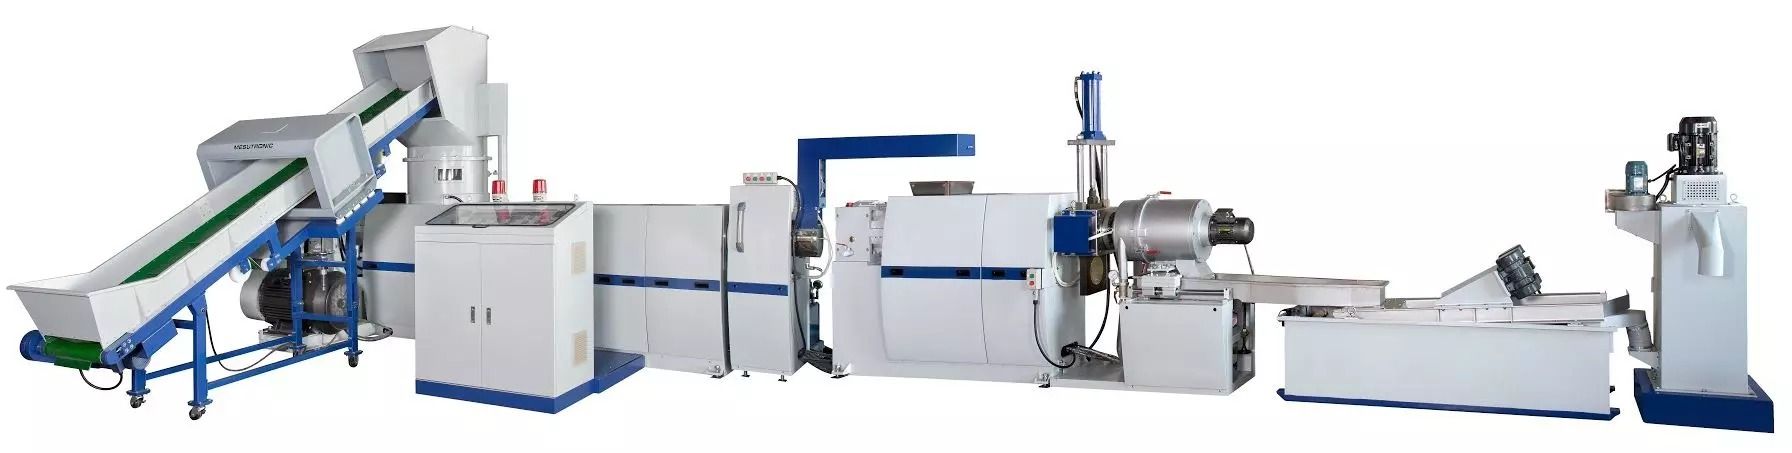 3-in-1 Shredder Intergrated Two-Stage Plastic Recycling Machine incorporates the crusher, the extruder and the pelletizer, suitable for recycling soft plastics.